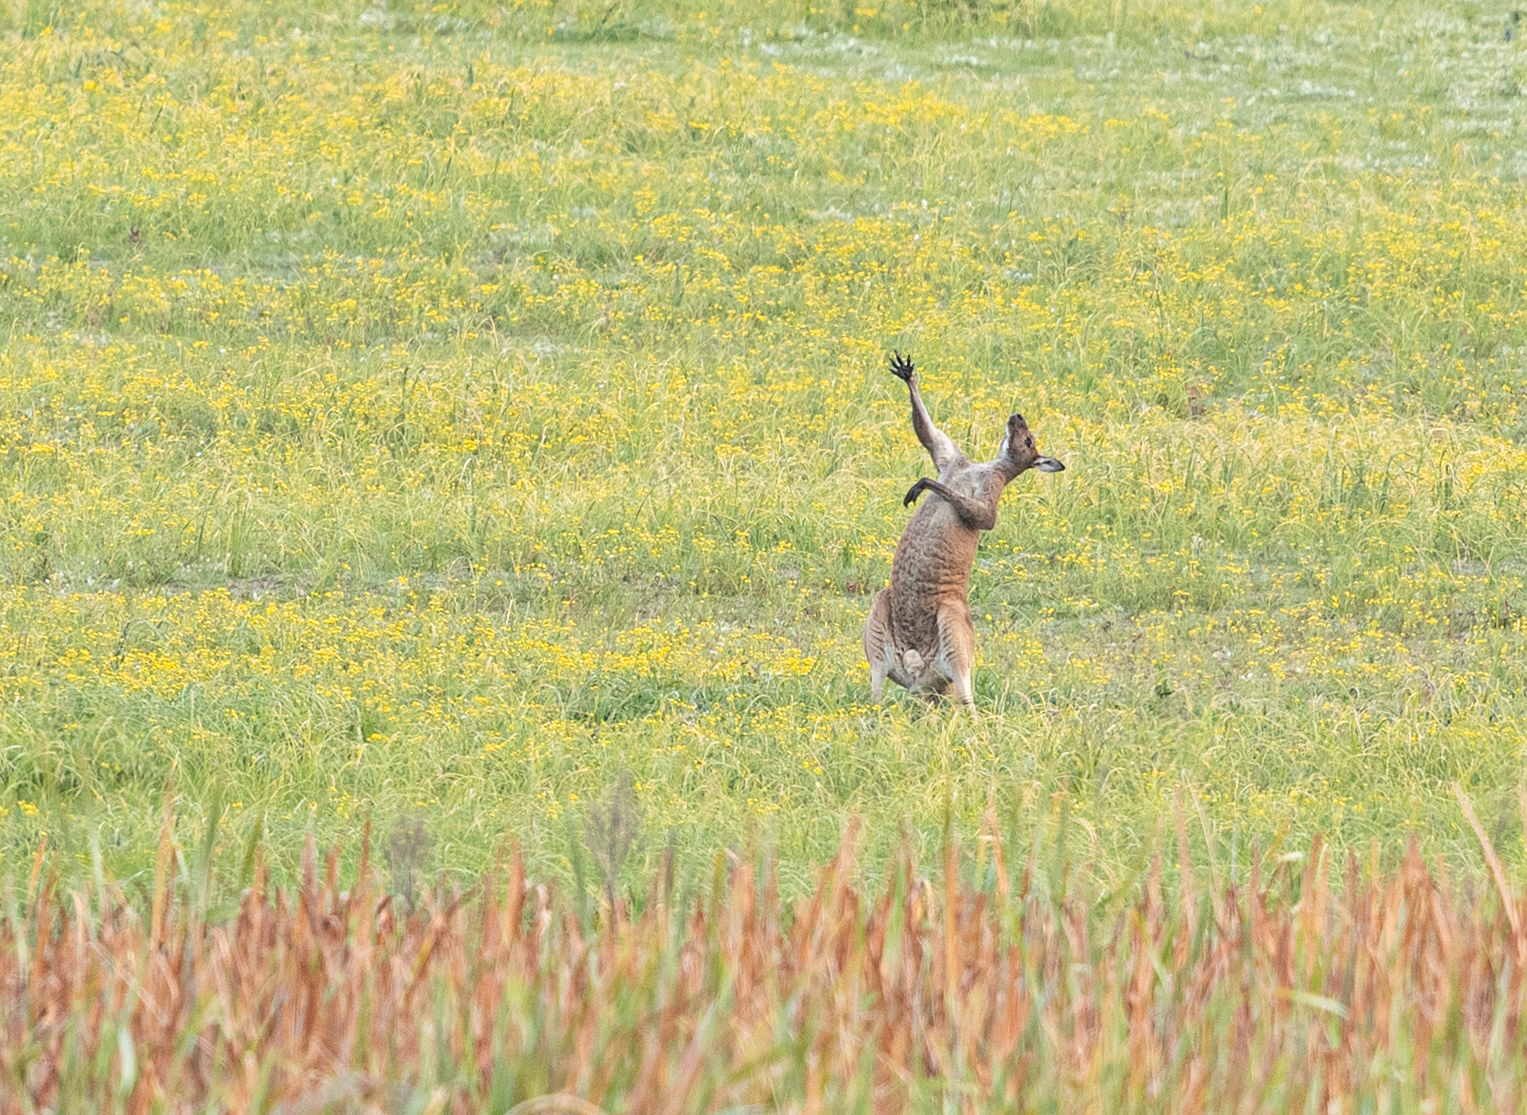 The Comedy Wildlife Photography Awards 2021 Lea Scaddan Perth Australia Title: Opera warm-ups Description: The kangaroo looked like he was singing 'the hills are alive, with the sound of music' in the field. Animal: Kangaroo Location of shot: Perth, Australia